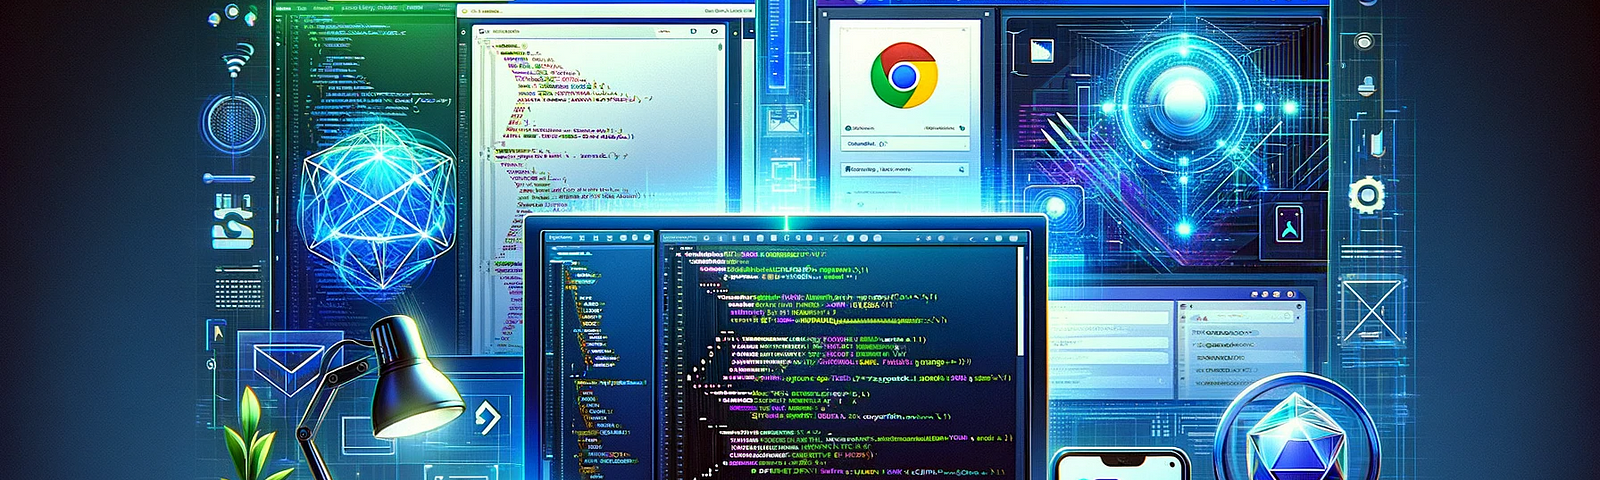 Illustration of a modern frontend development environment, featuring depictions of Visual Studio Code, GitHub, Chrome DevTools, and Google Lighthouse on a dark, technology-inspired background.